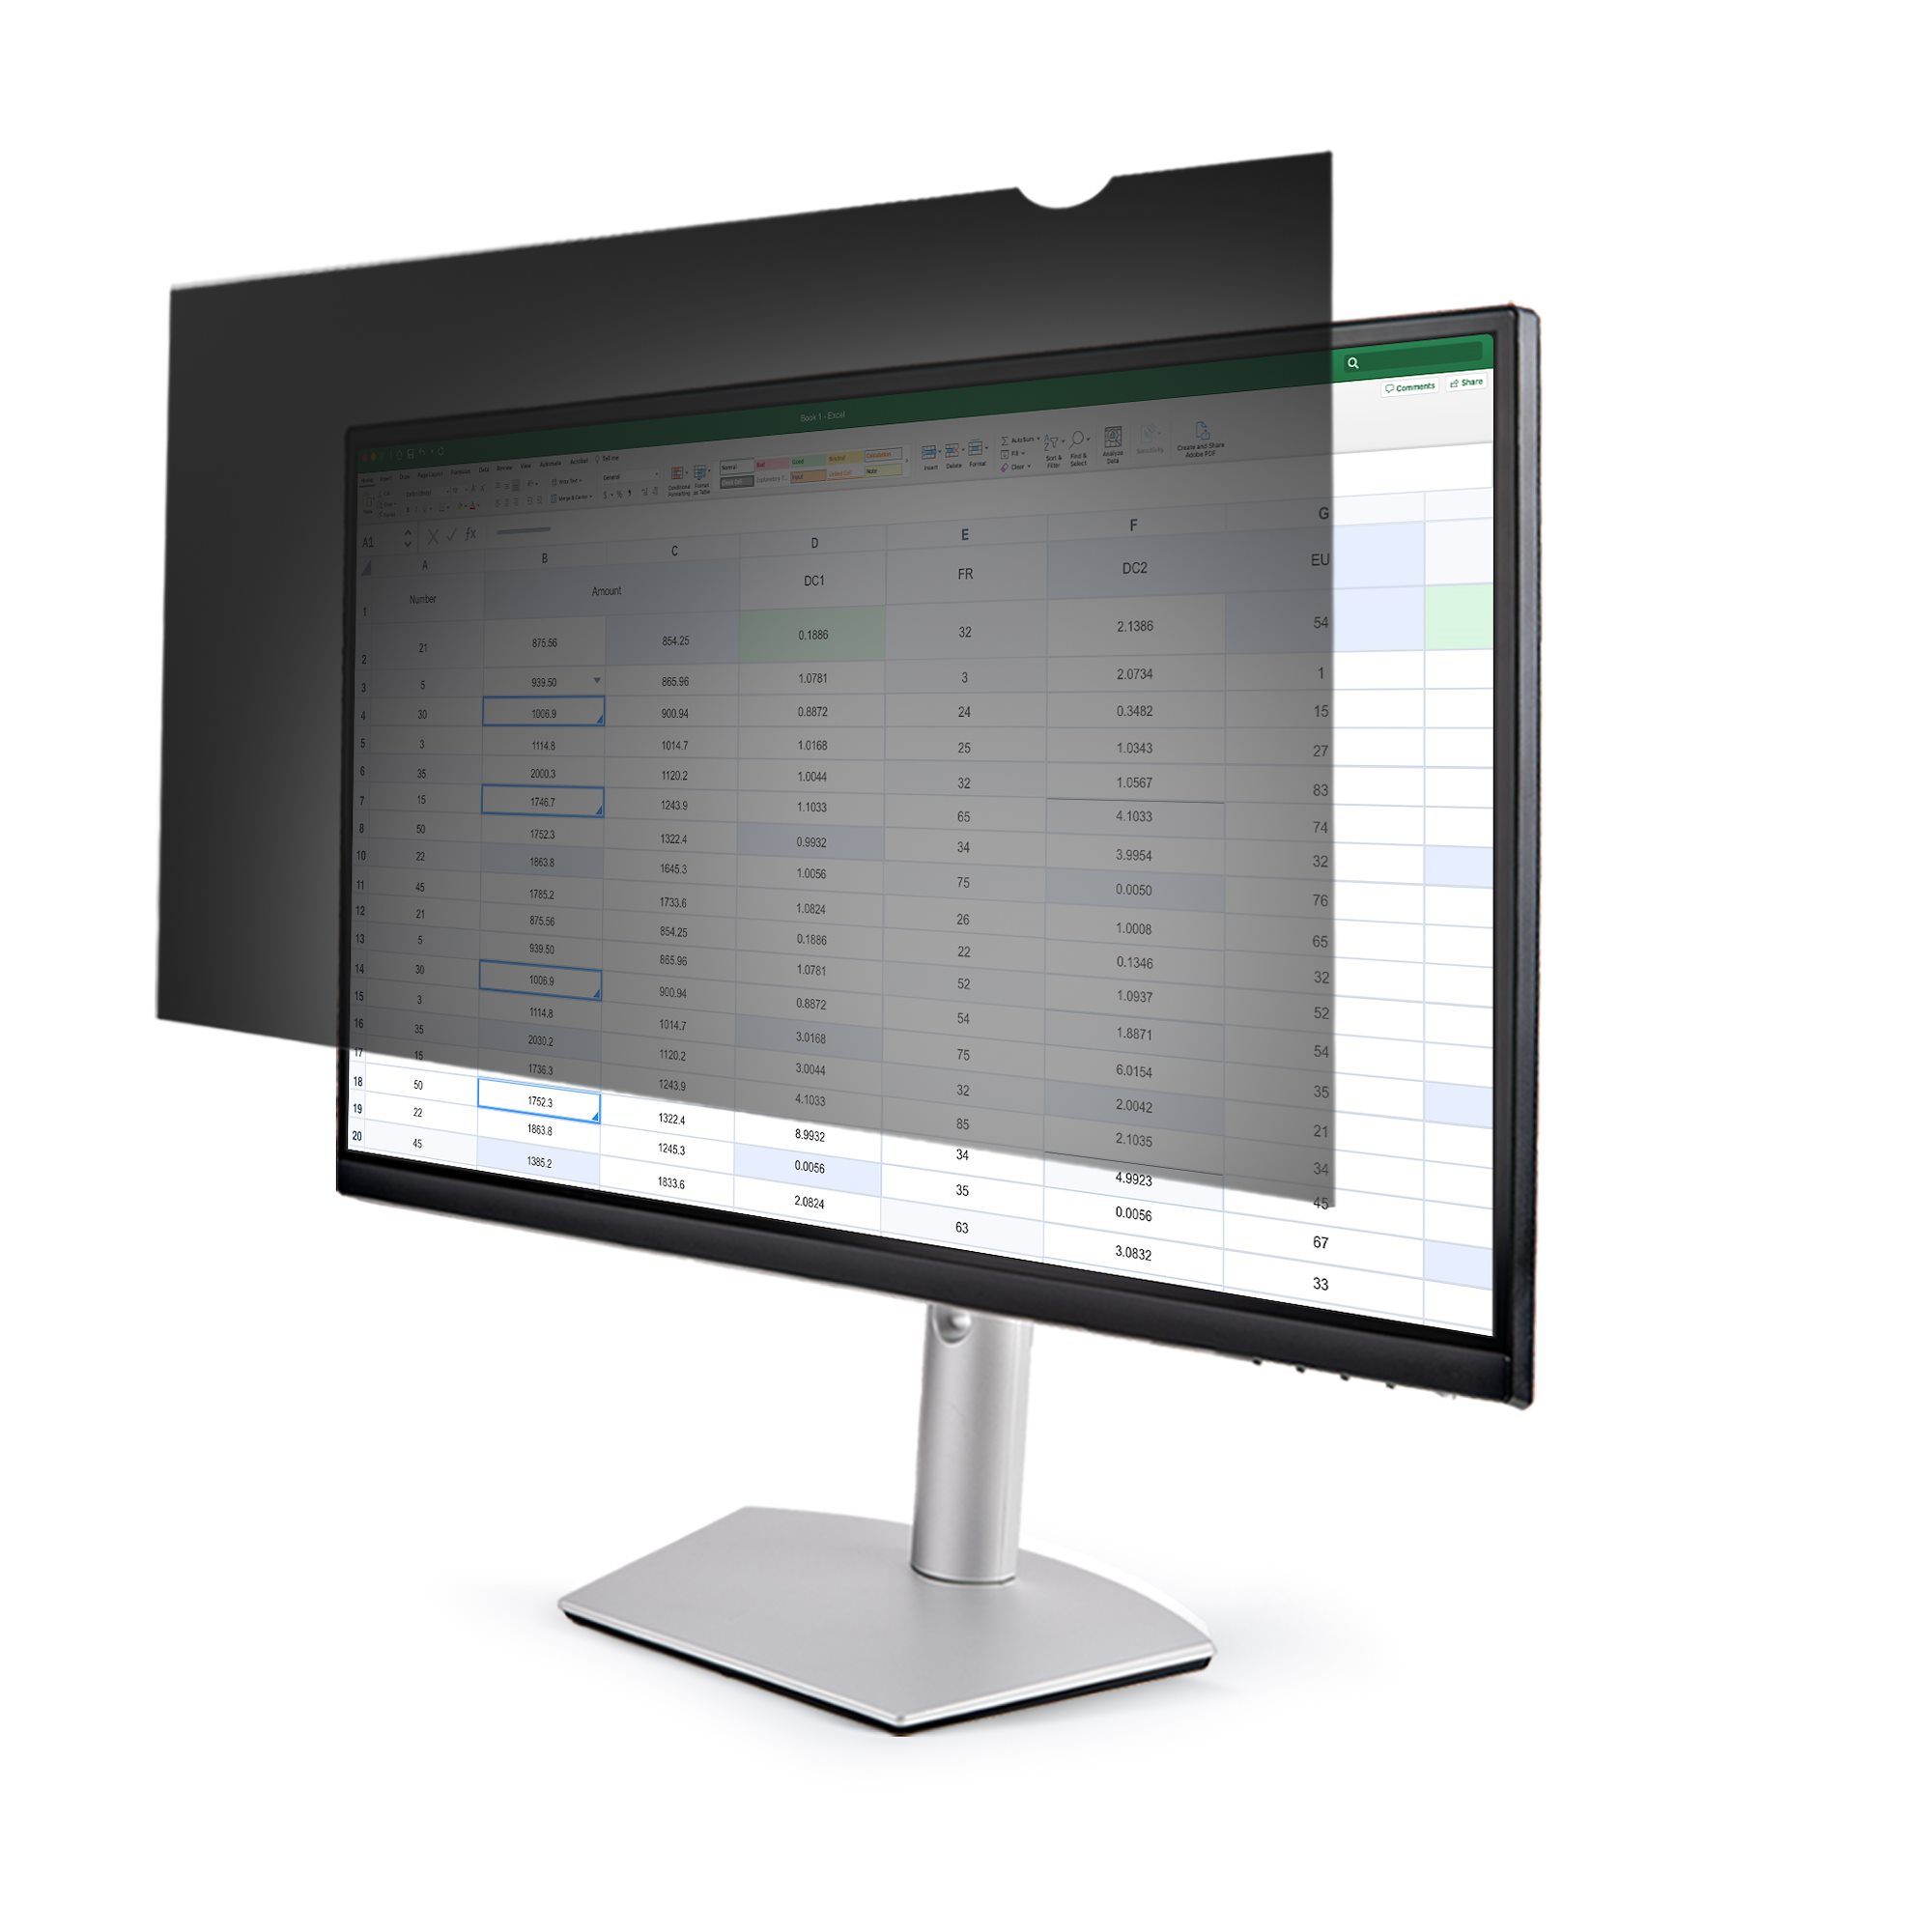 【PRIVACY-SCREEN-22MB】22IN. MONITOR PRIVACY SCREEN